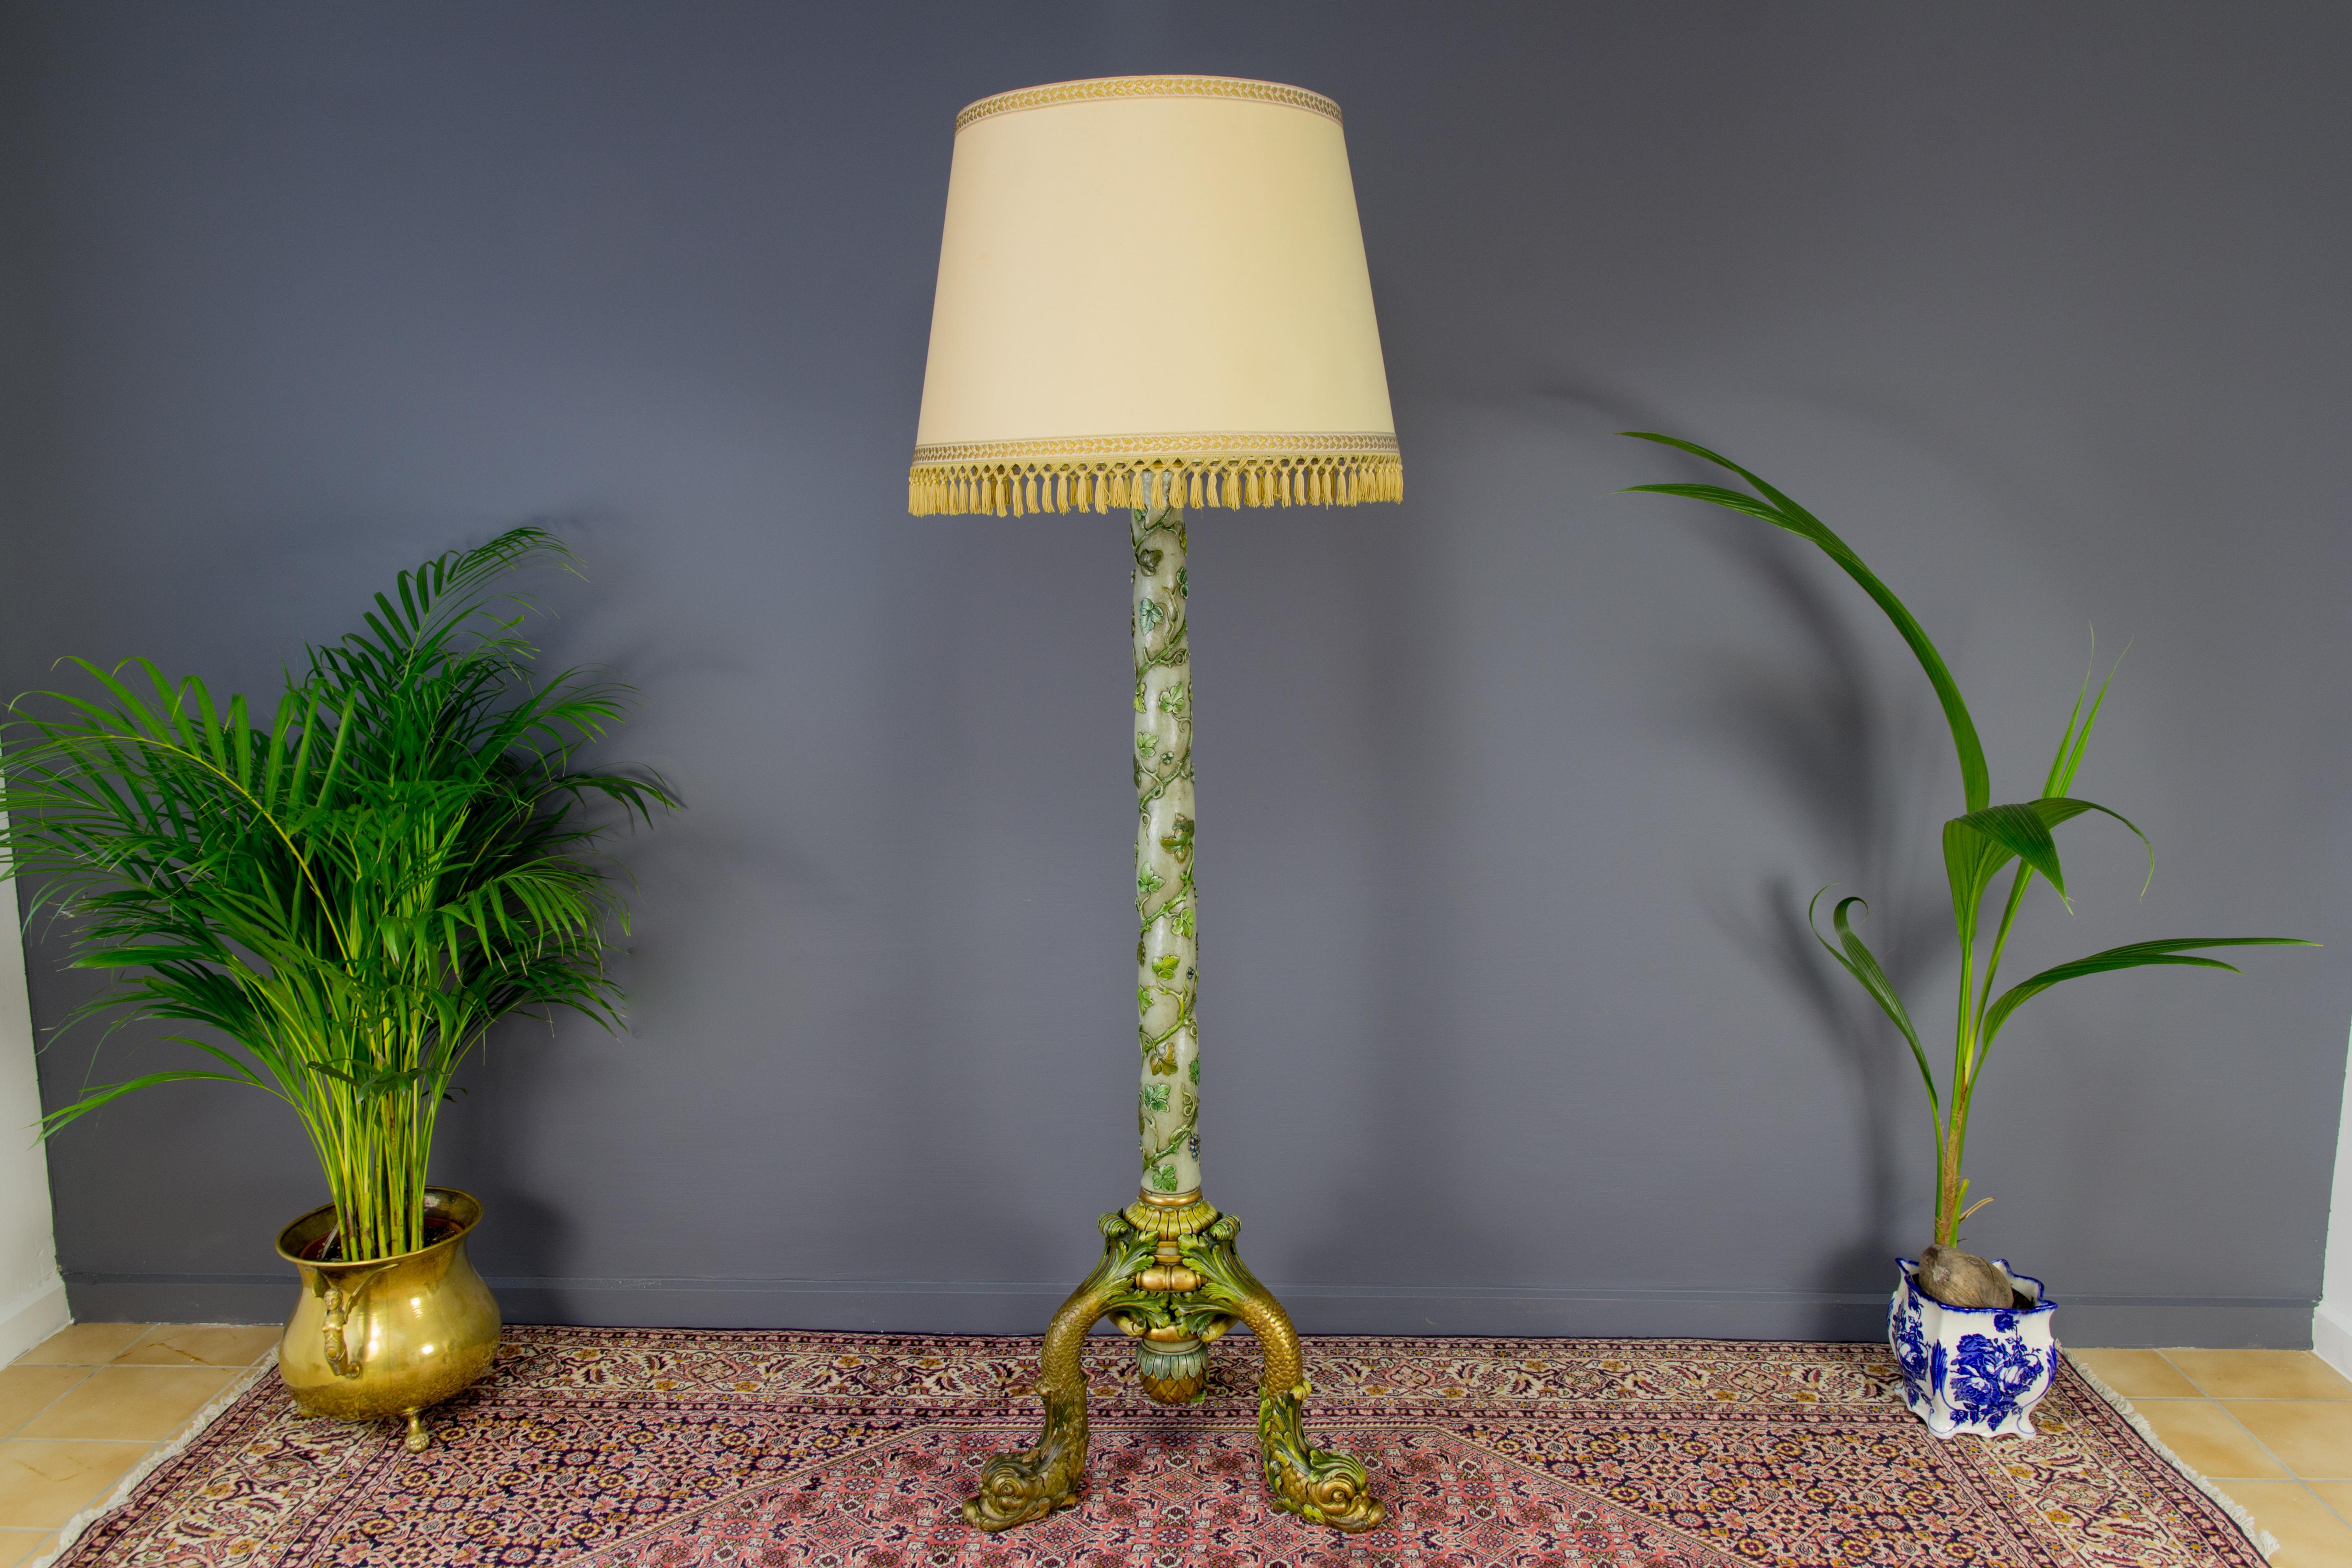 Early 20th-century Italian carved wooden floor lamp with dolphins.
Impressive early 20th century Italian Grotto style wooden floor lamp with carved and in green and golden tones painted meandering grapes and vine leaves. This polychrome antique